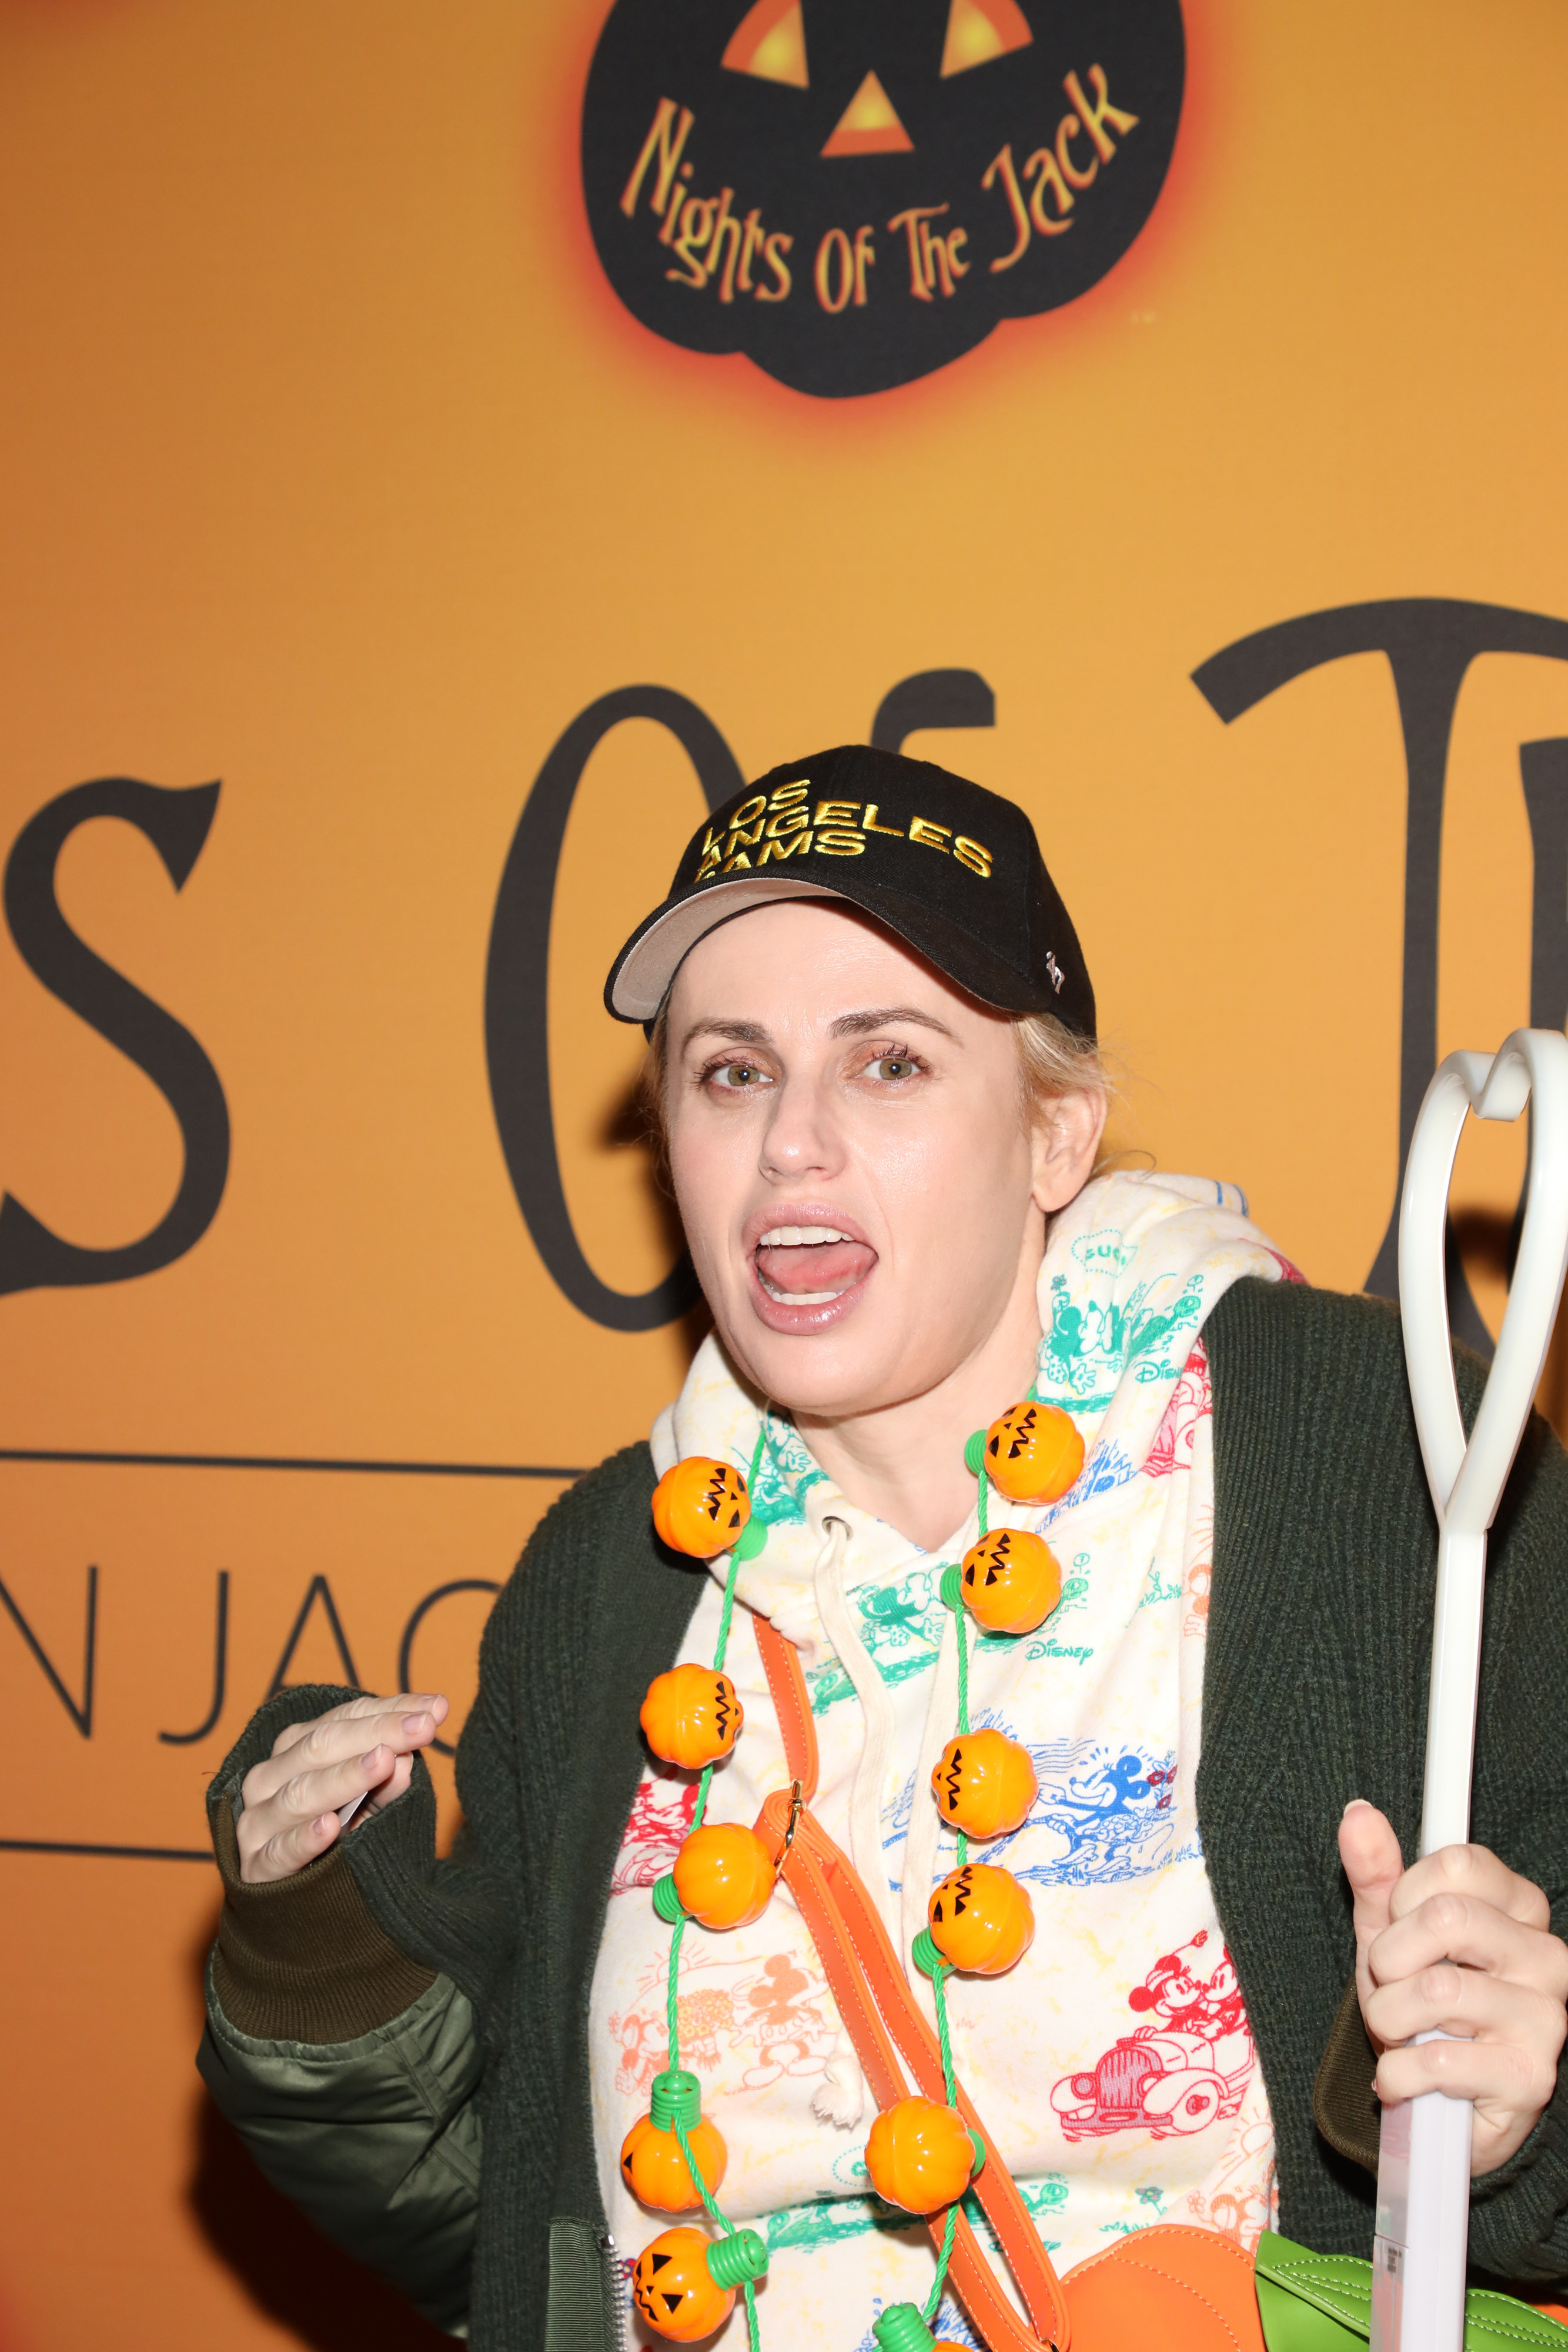 Rebel wearing a Jack-O-Lantern necklace as she makes a silly face at an event